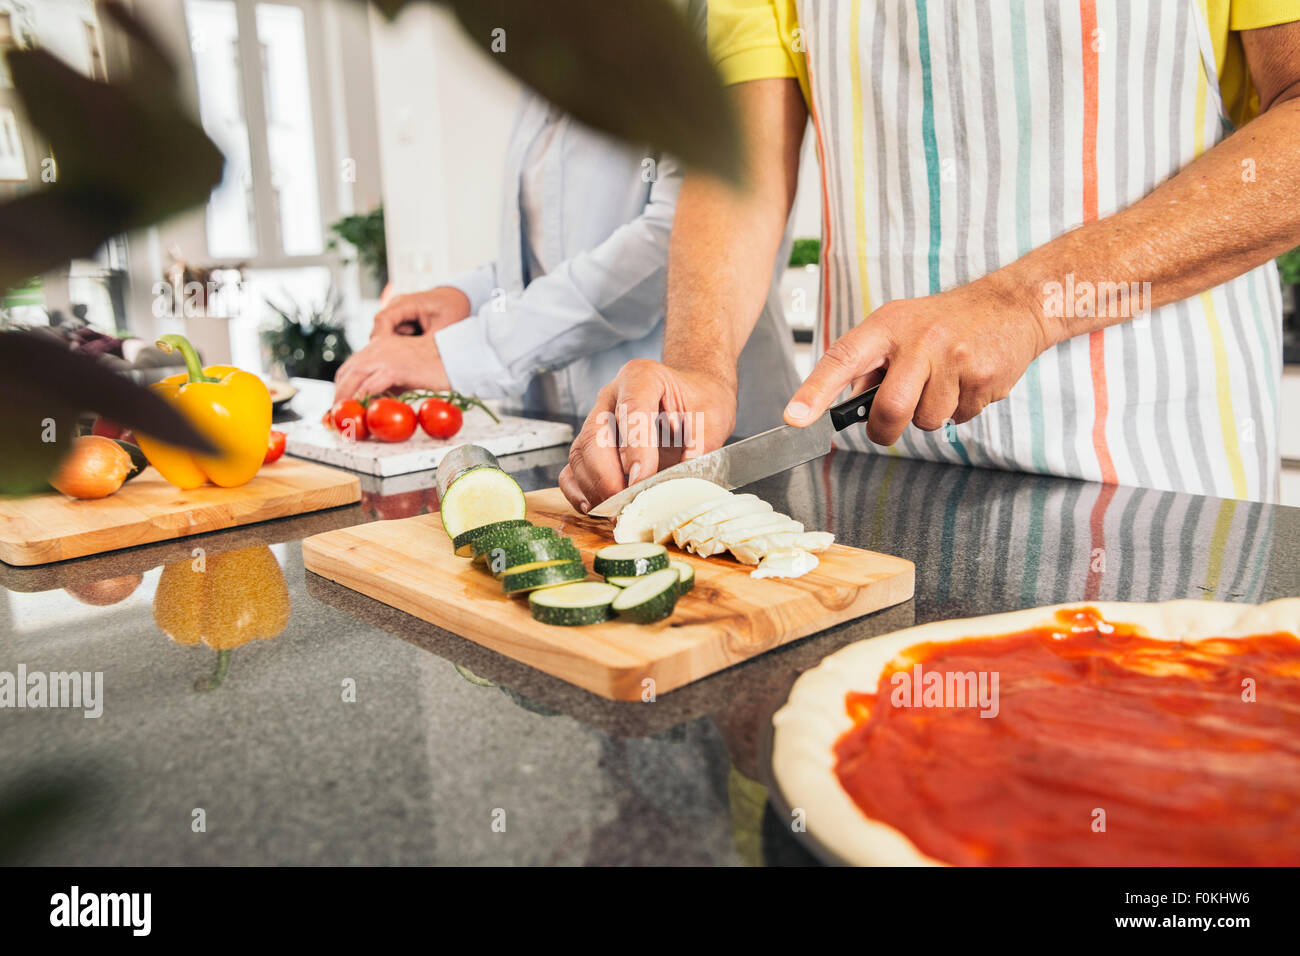 Couple cutting vegetables in the kitchen Stock Photo